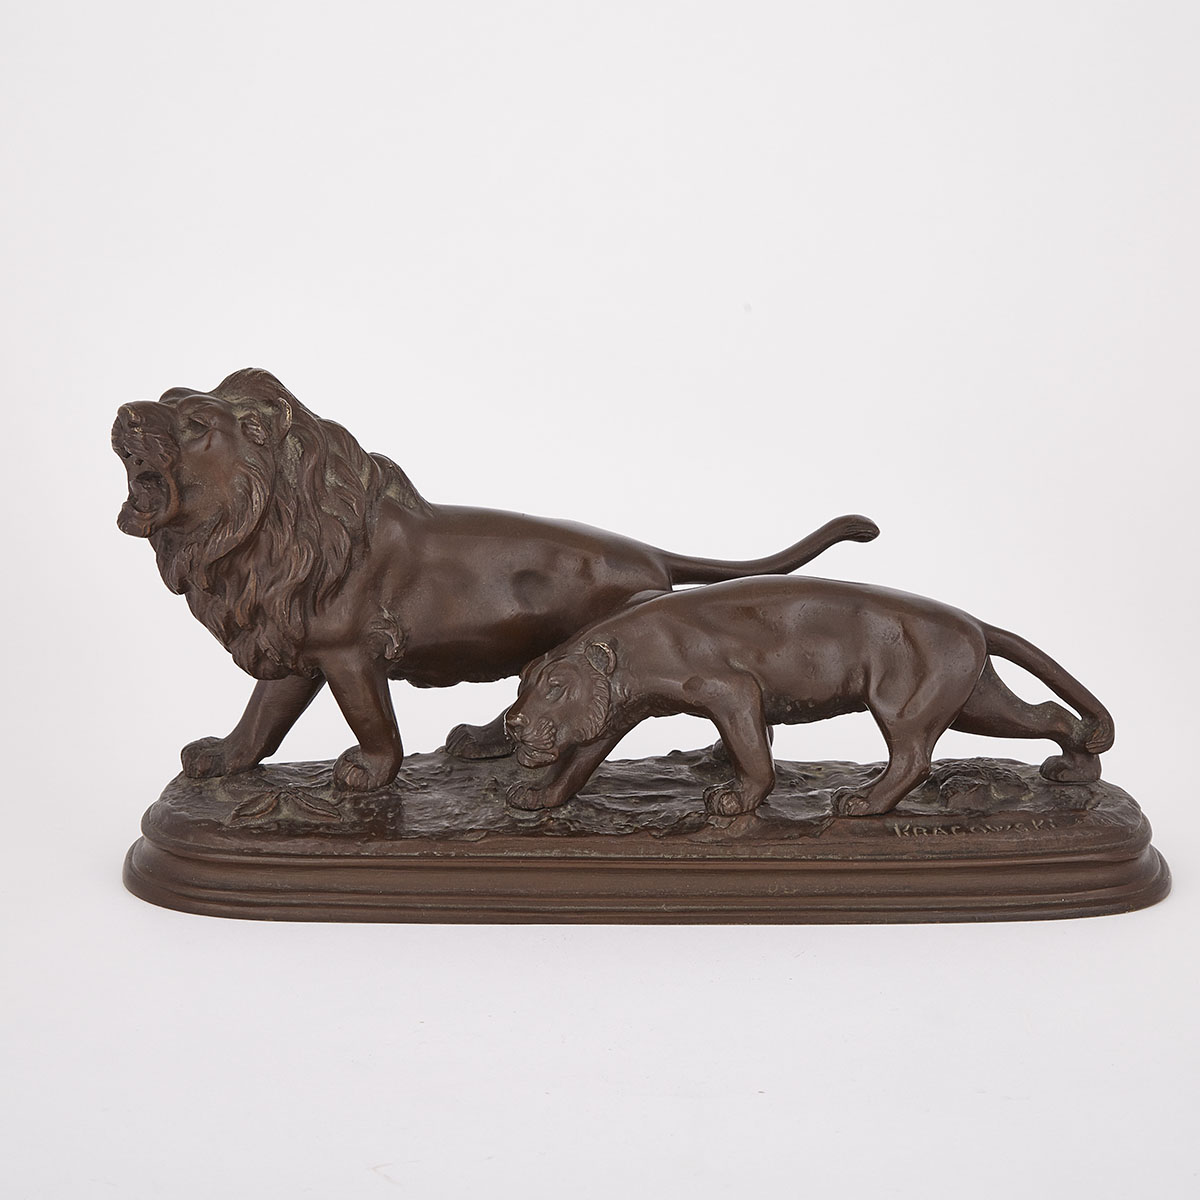 Animalier School Patinated Bronze Group, early 20th century